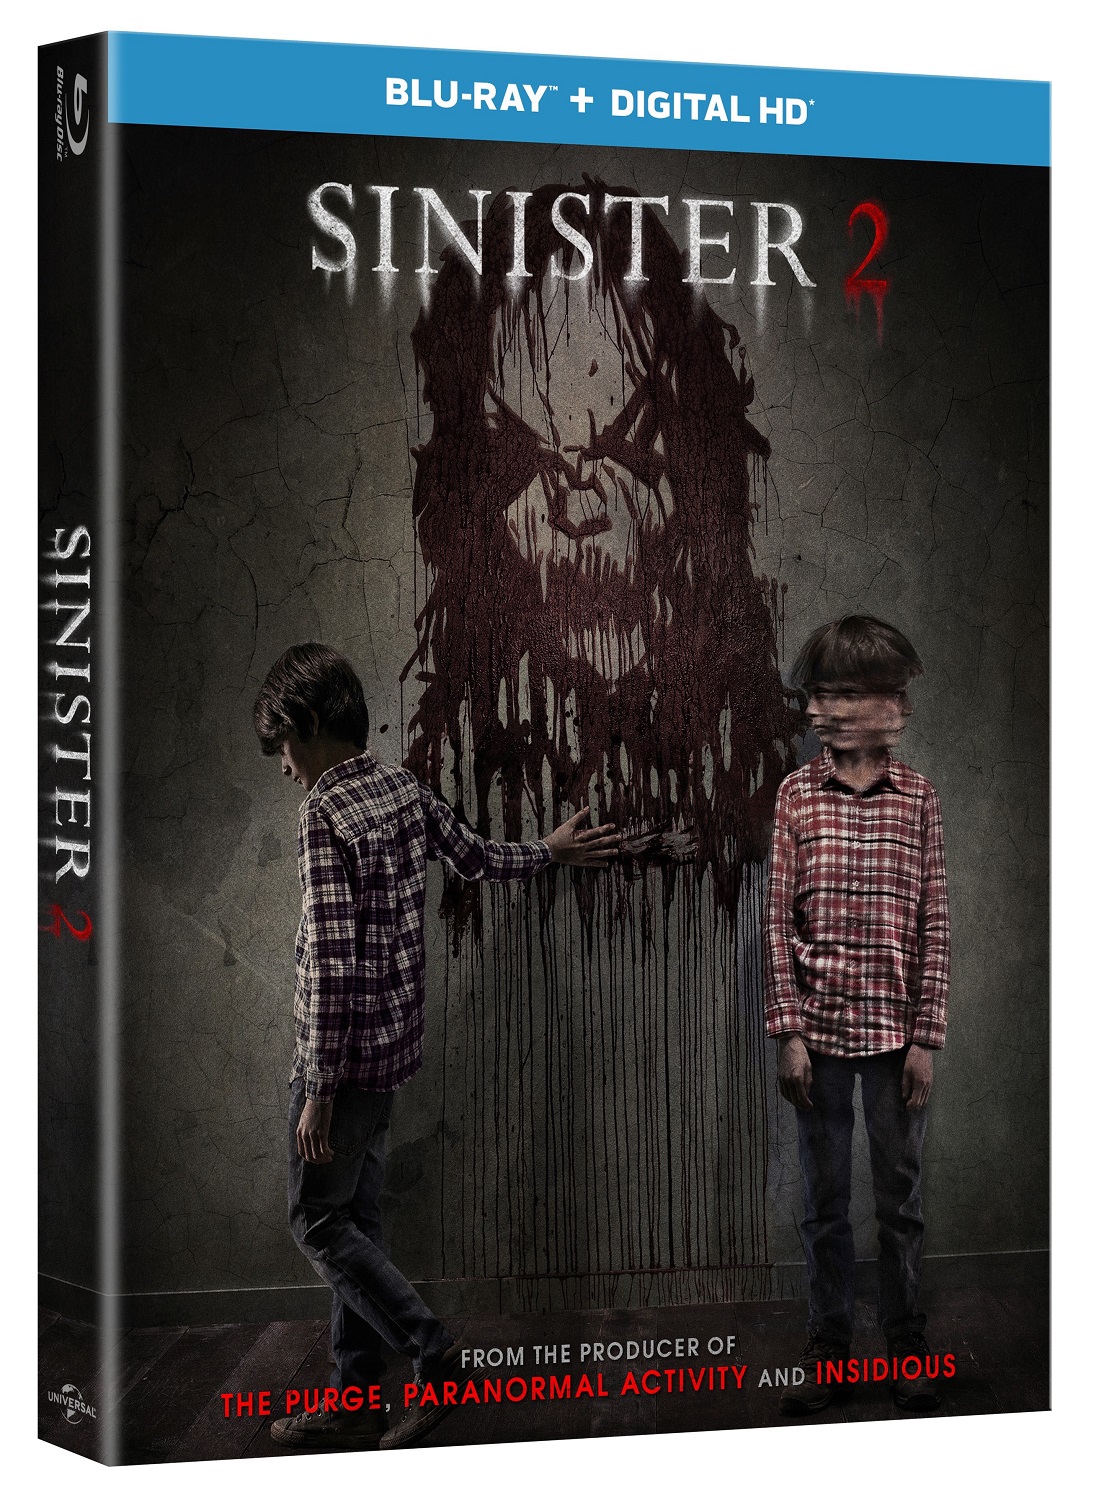 Sinister 2 Blu-Ray Release